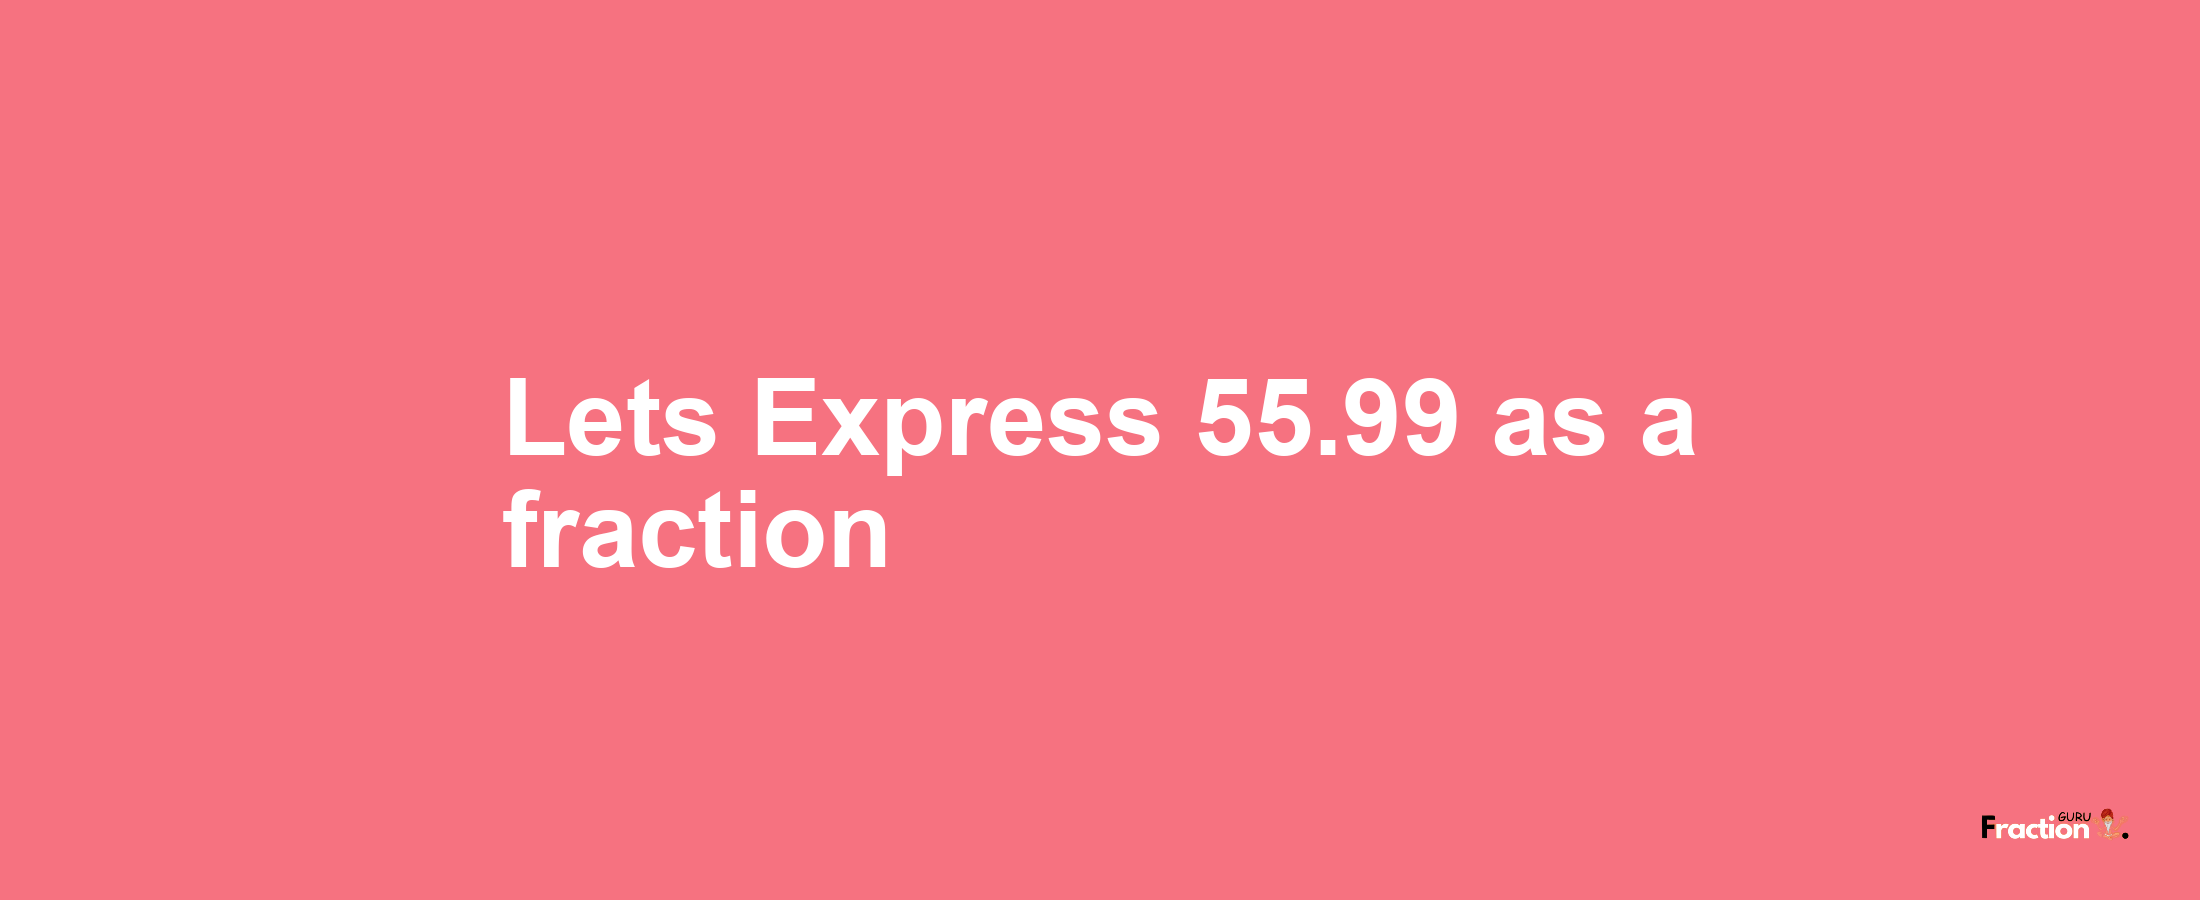 Lets Express 55.99 as afraction